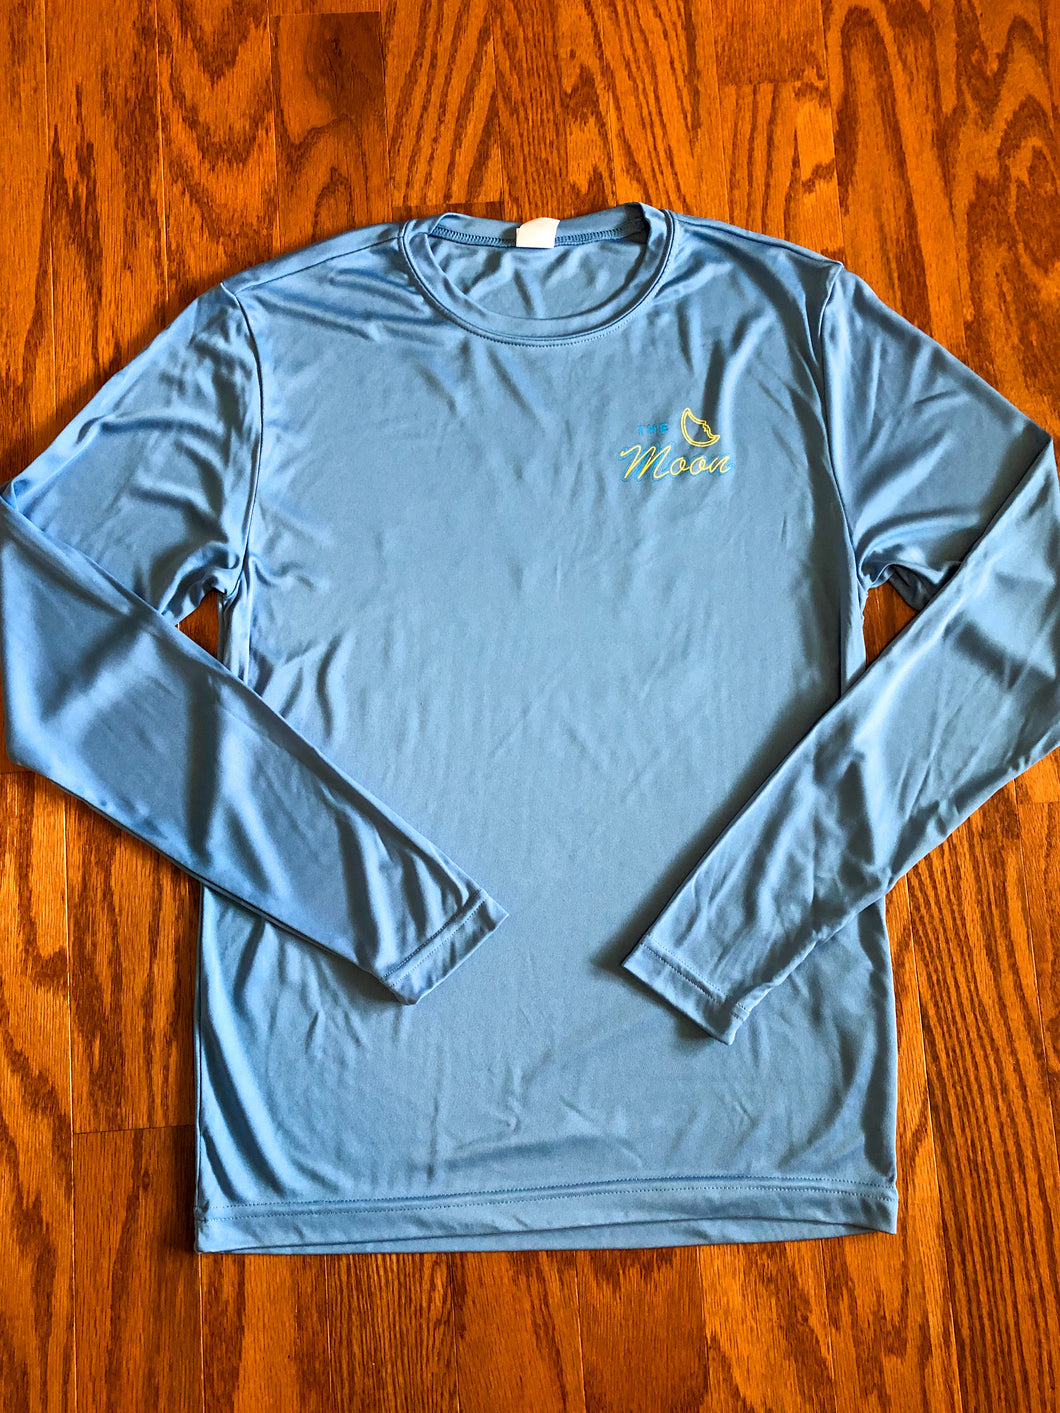 Long Sleeve Dry-Fit T-Shirt